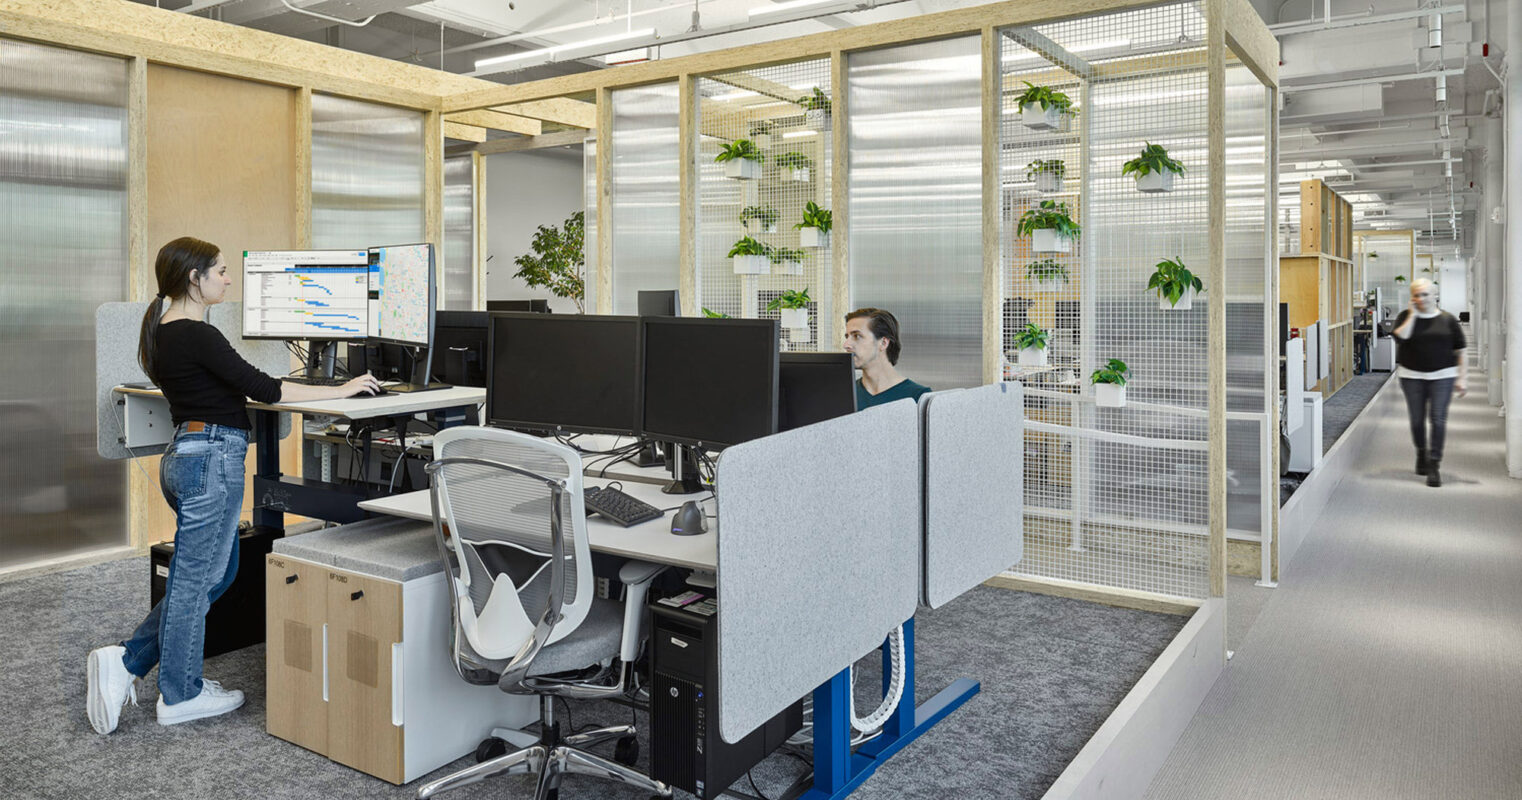 Modern office interior featuring standing desks, ergonomic chairs, and dual monitor setups. Glass partitions with wooden frames provide semi-private spaces, while indoor plants inject vitality. The workspace balances openness and privacy, optimizing collaboration and focus areas. Natural light accentuates the clean, contemporary aesthetic.